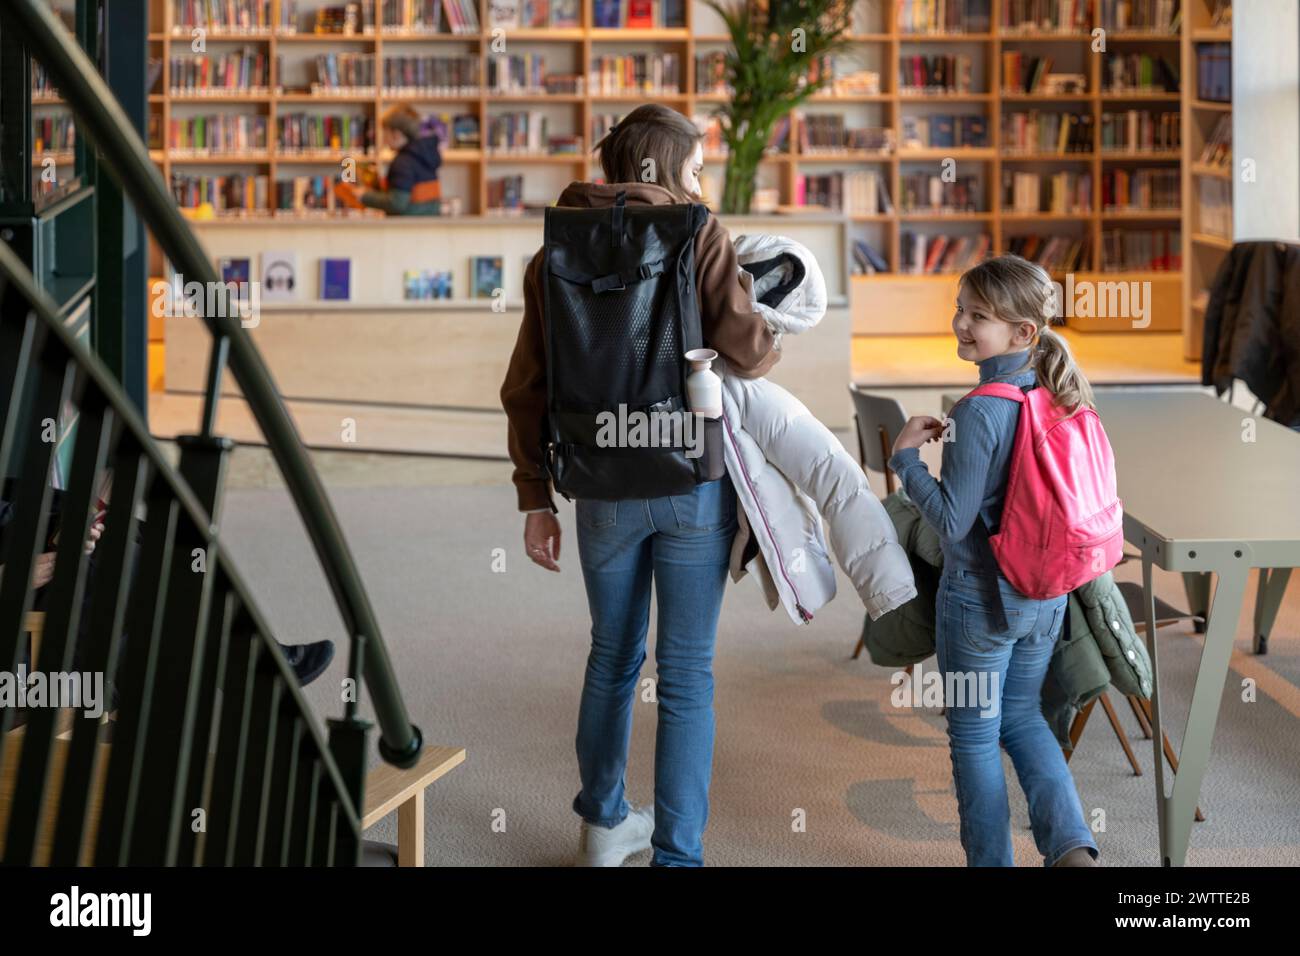 A candid moment as a woman and two children ascend the stairs in a modern library. Stock Photo